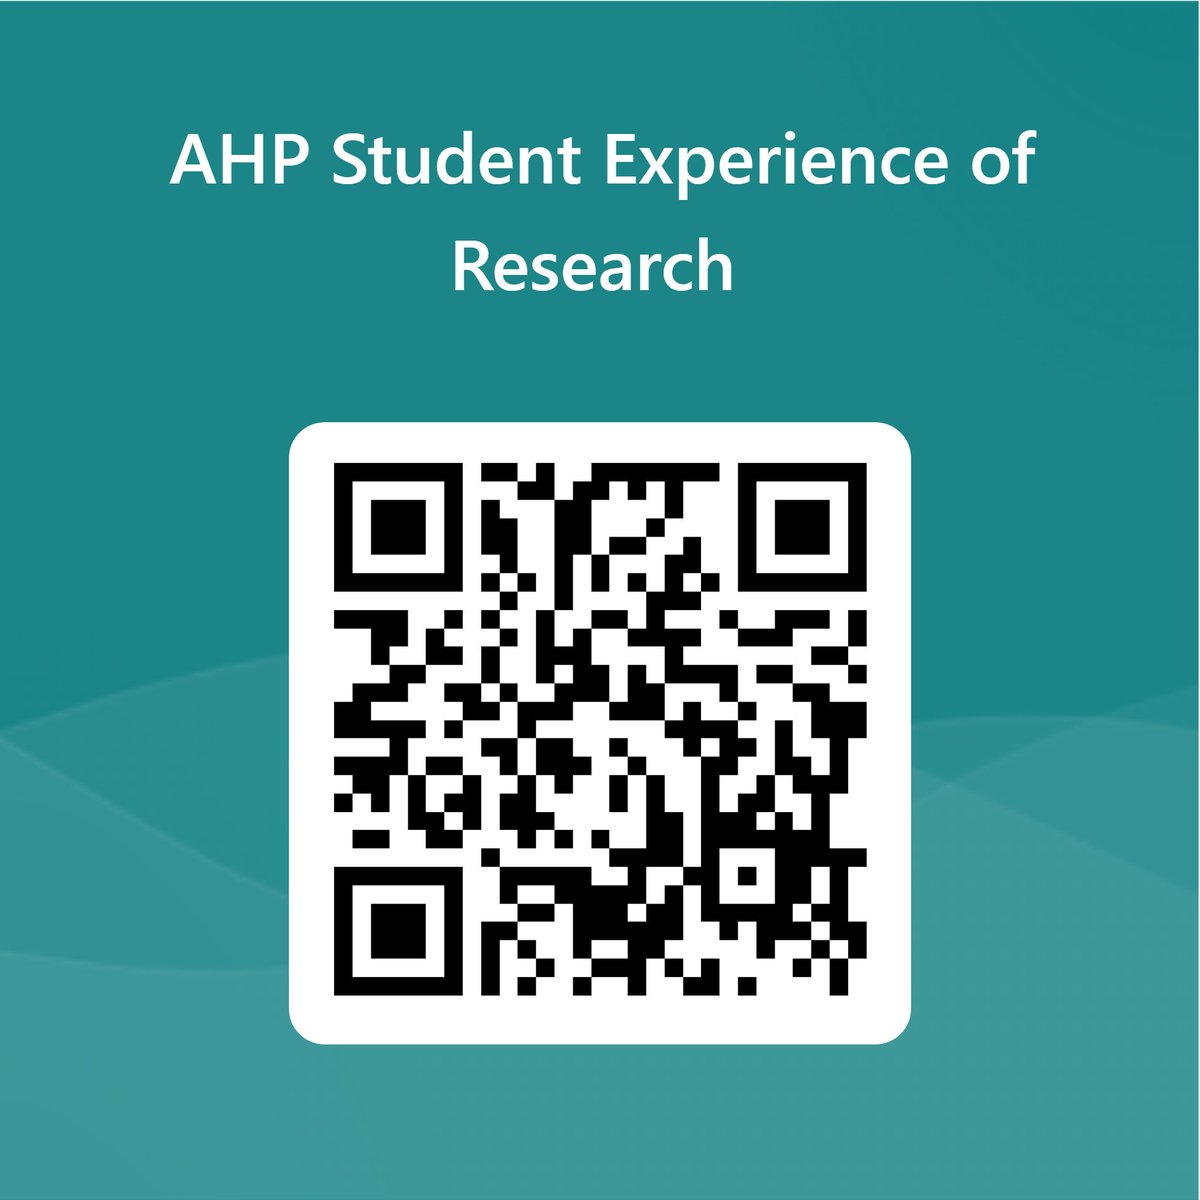 Today we are launching a survey to listen to AHP student experiences of research in their pre-reg training. SPREAD the word please, email students, send them the QR code! @HazelRoddam1 @BeverleyHarden @veronicaann20 @S_Mo_15 @Gordon_Hendry @CathyJBowen forms.office.com/e/k24cPqxymR